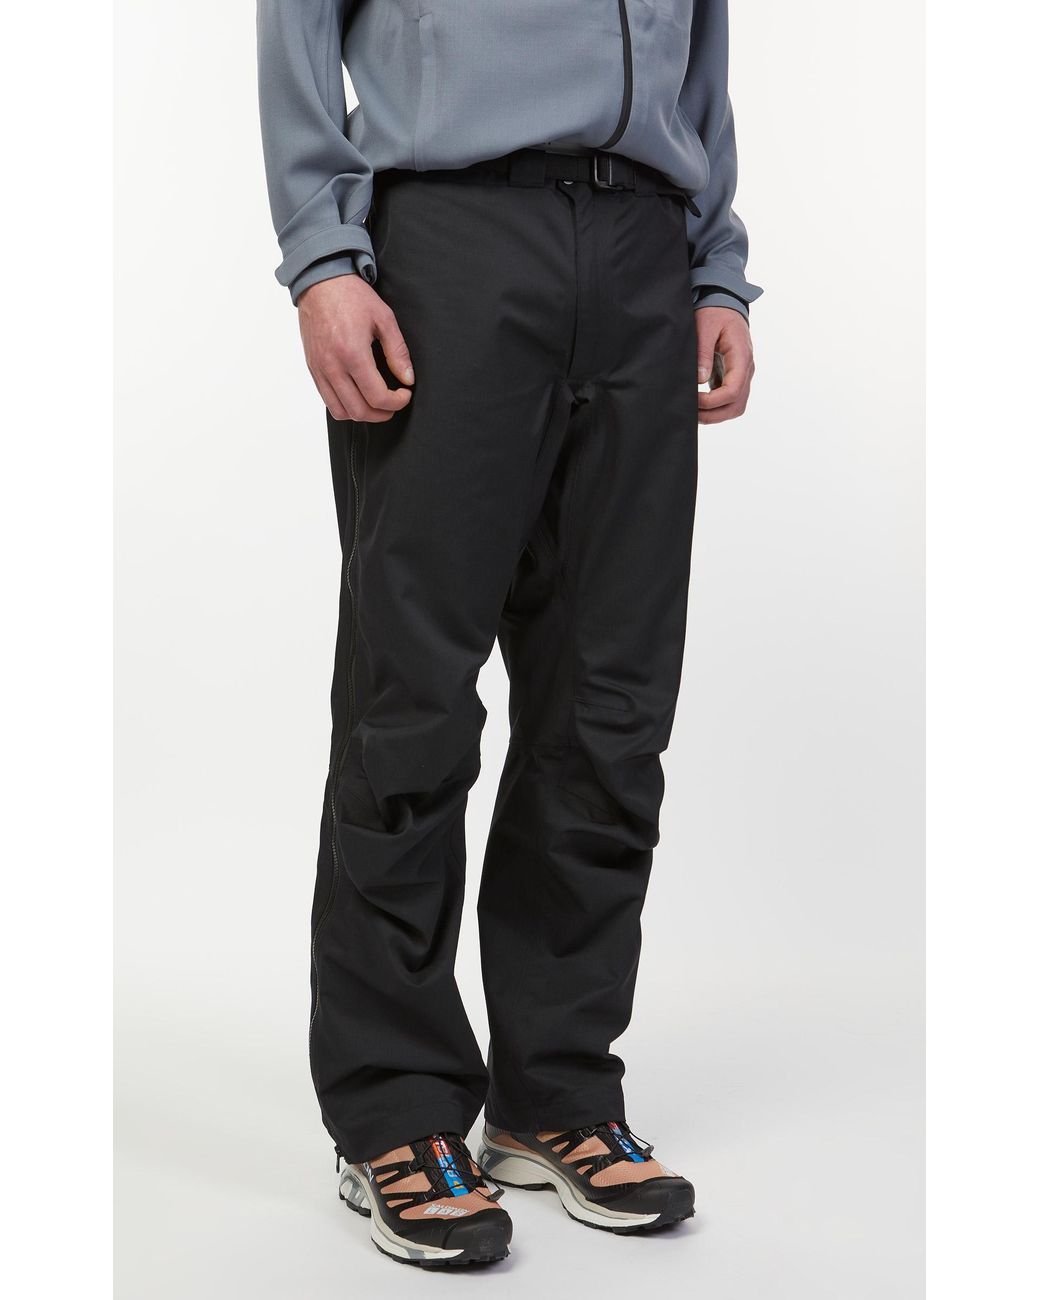 KLOPMAN WORK TROUSERS WITH THIGH POCKETS. 